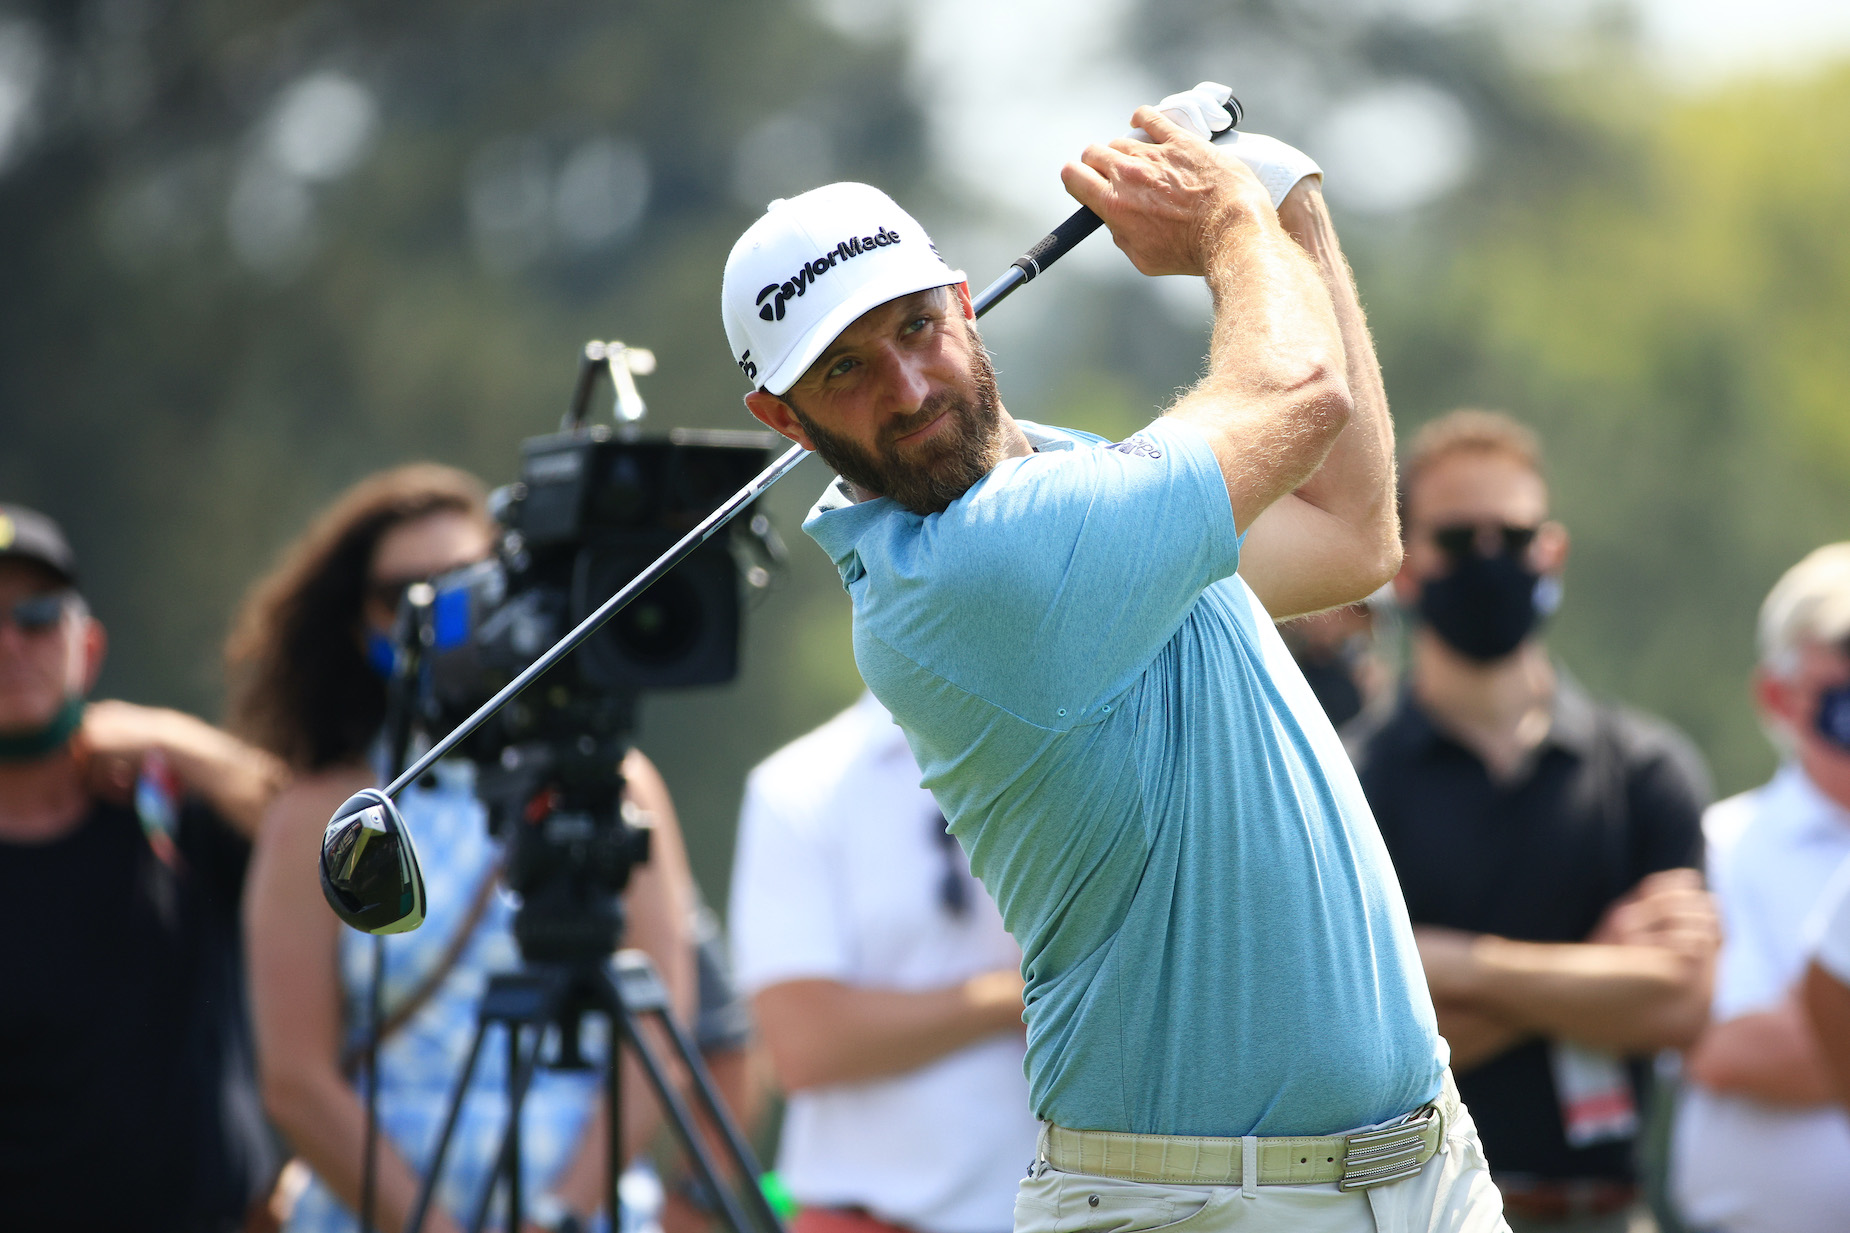 Dustin Johnson during a practice round ahead of the 2021 Masters at Augusta National.